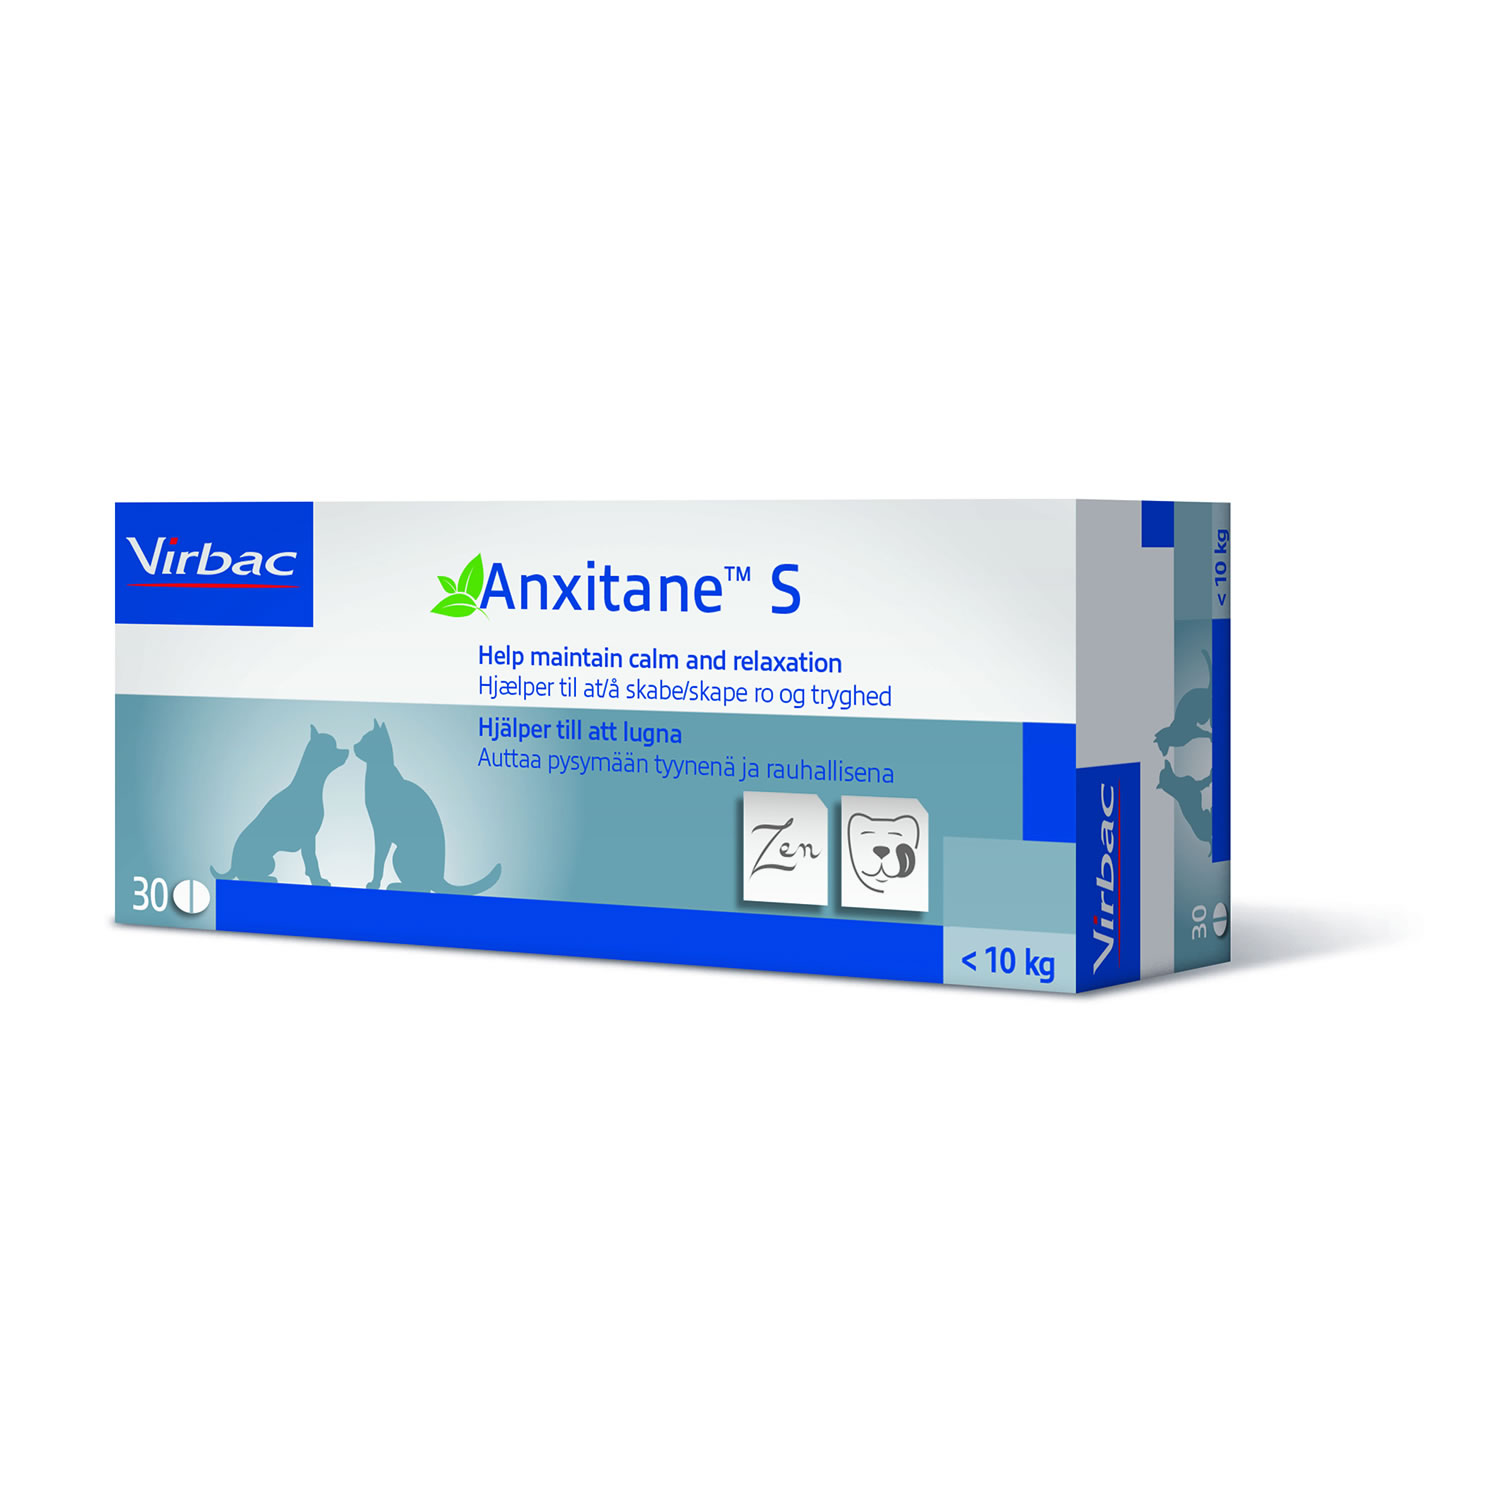 VIRBAC ANXITANE FOR CATS & DOGS  30 PACK